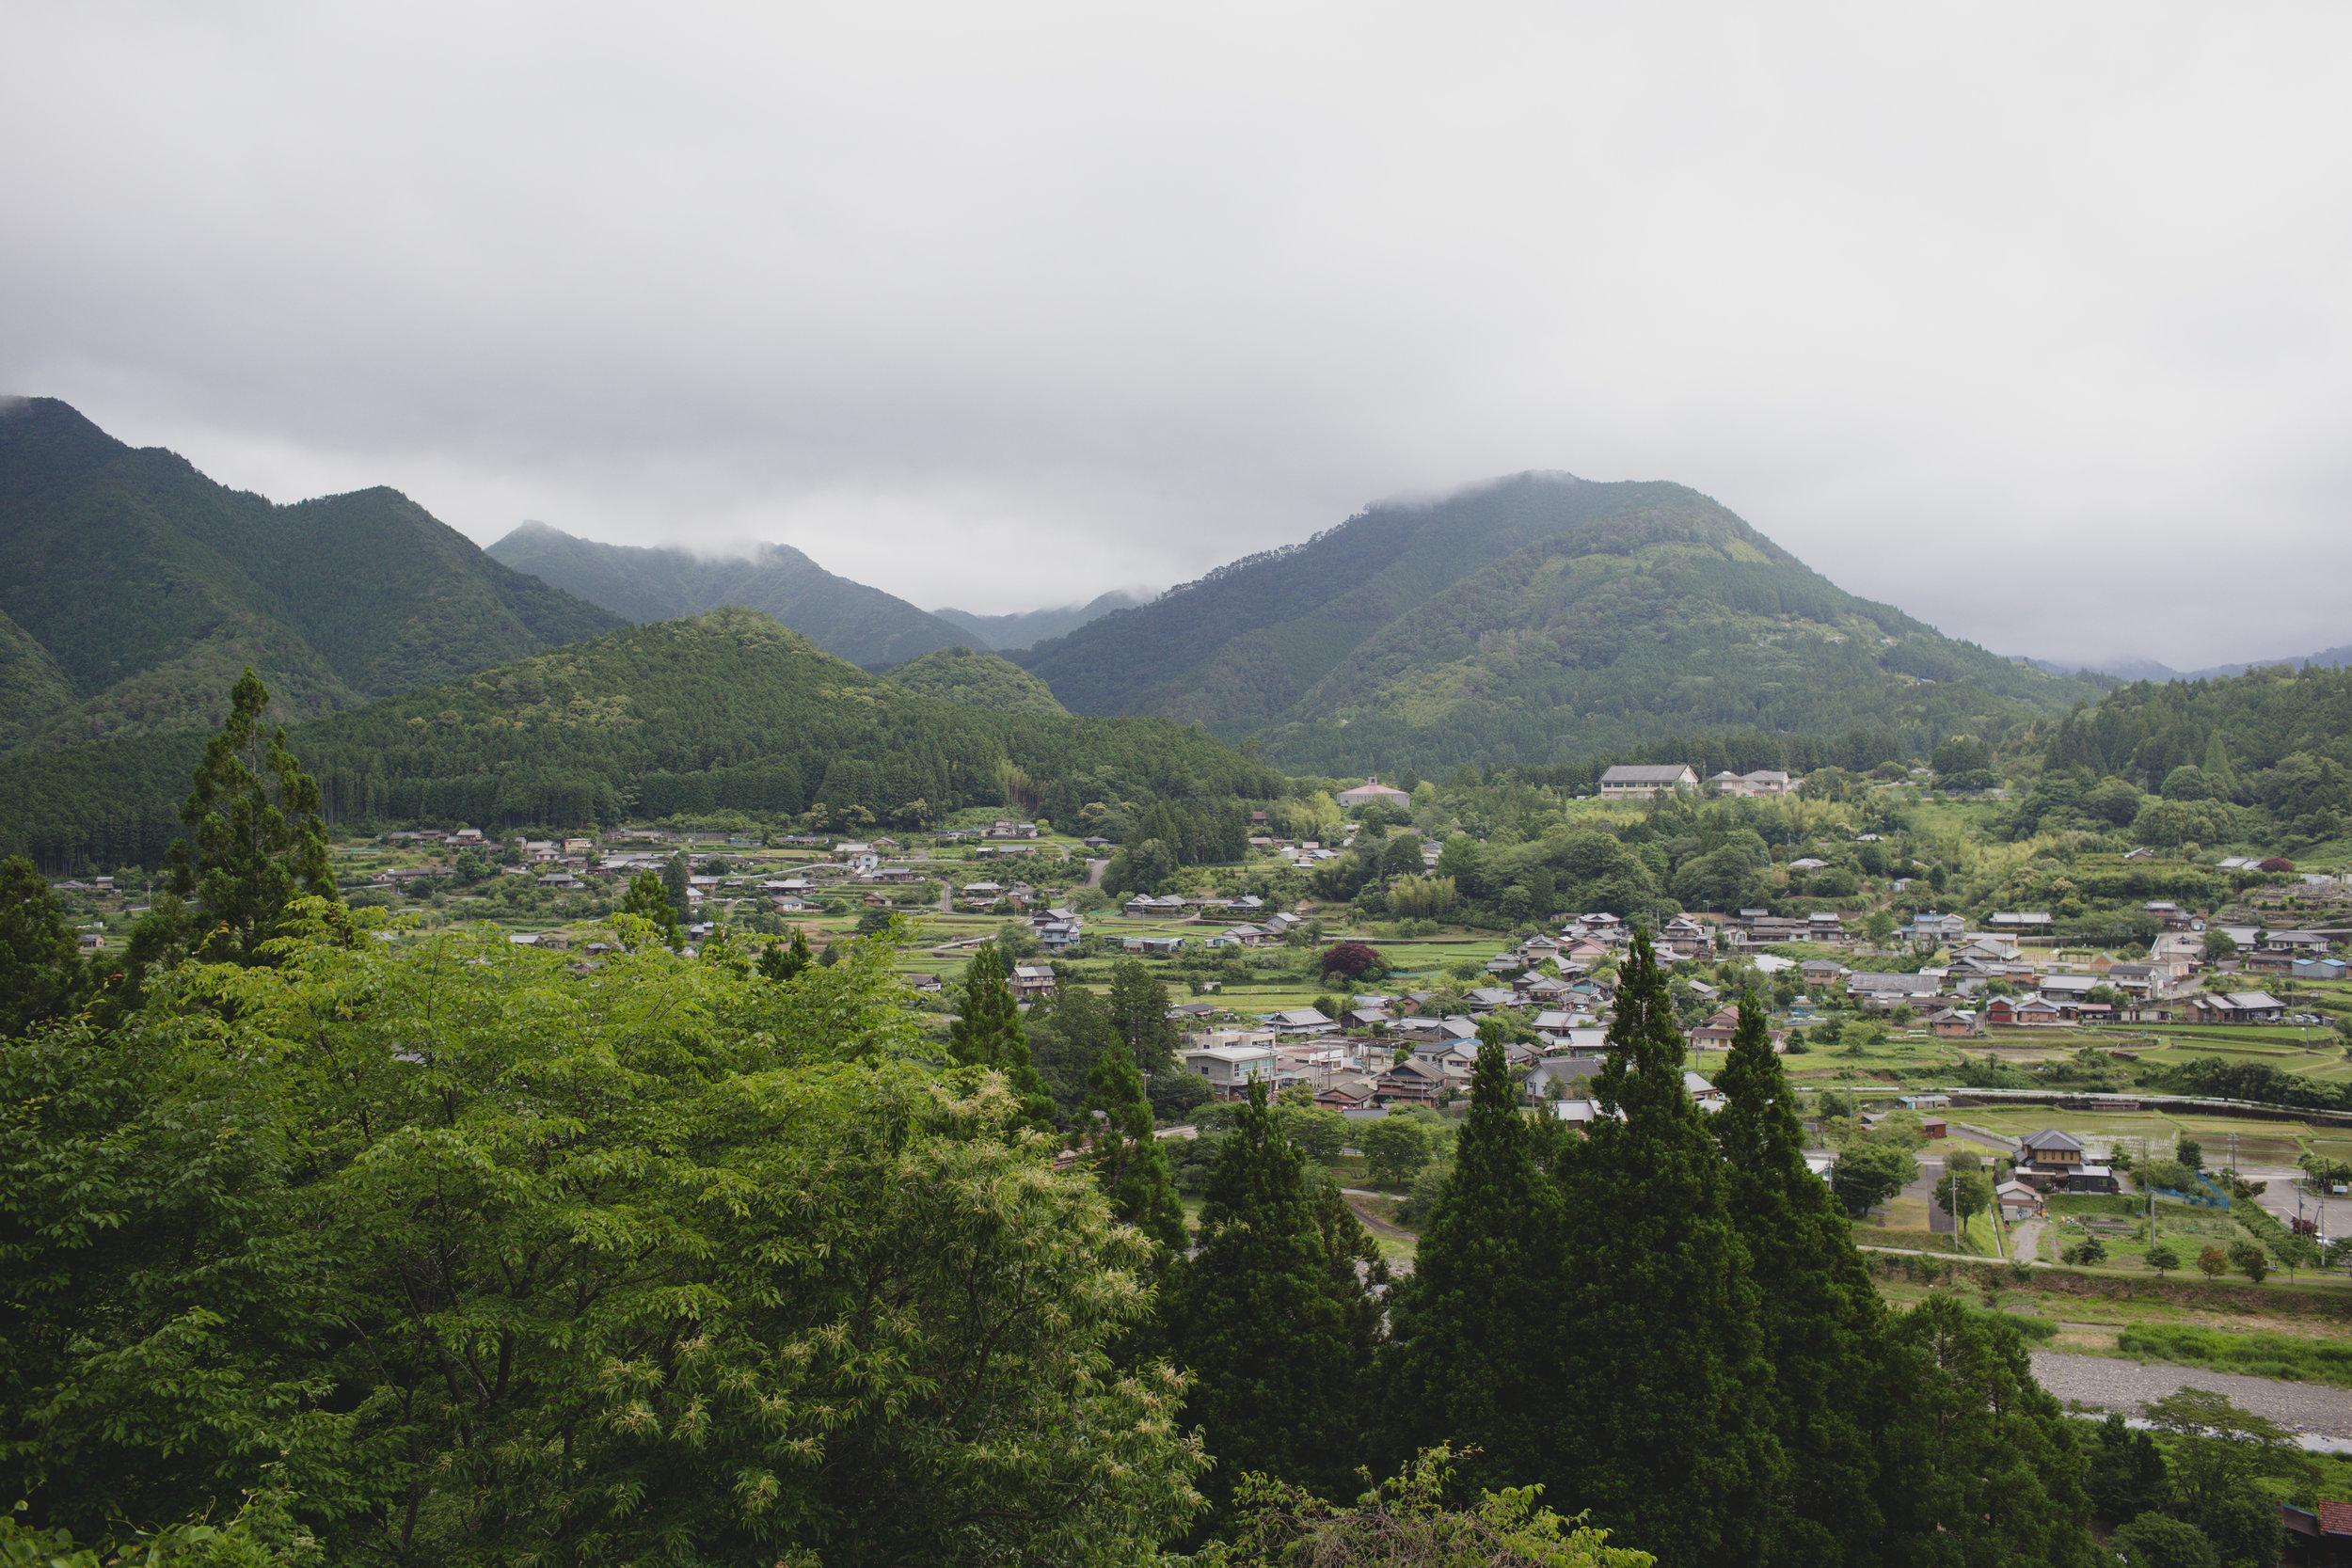  After a full day of hiking through mist and rain  we arrived at Chikatsuyu 